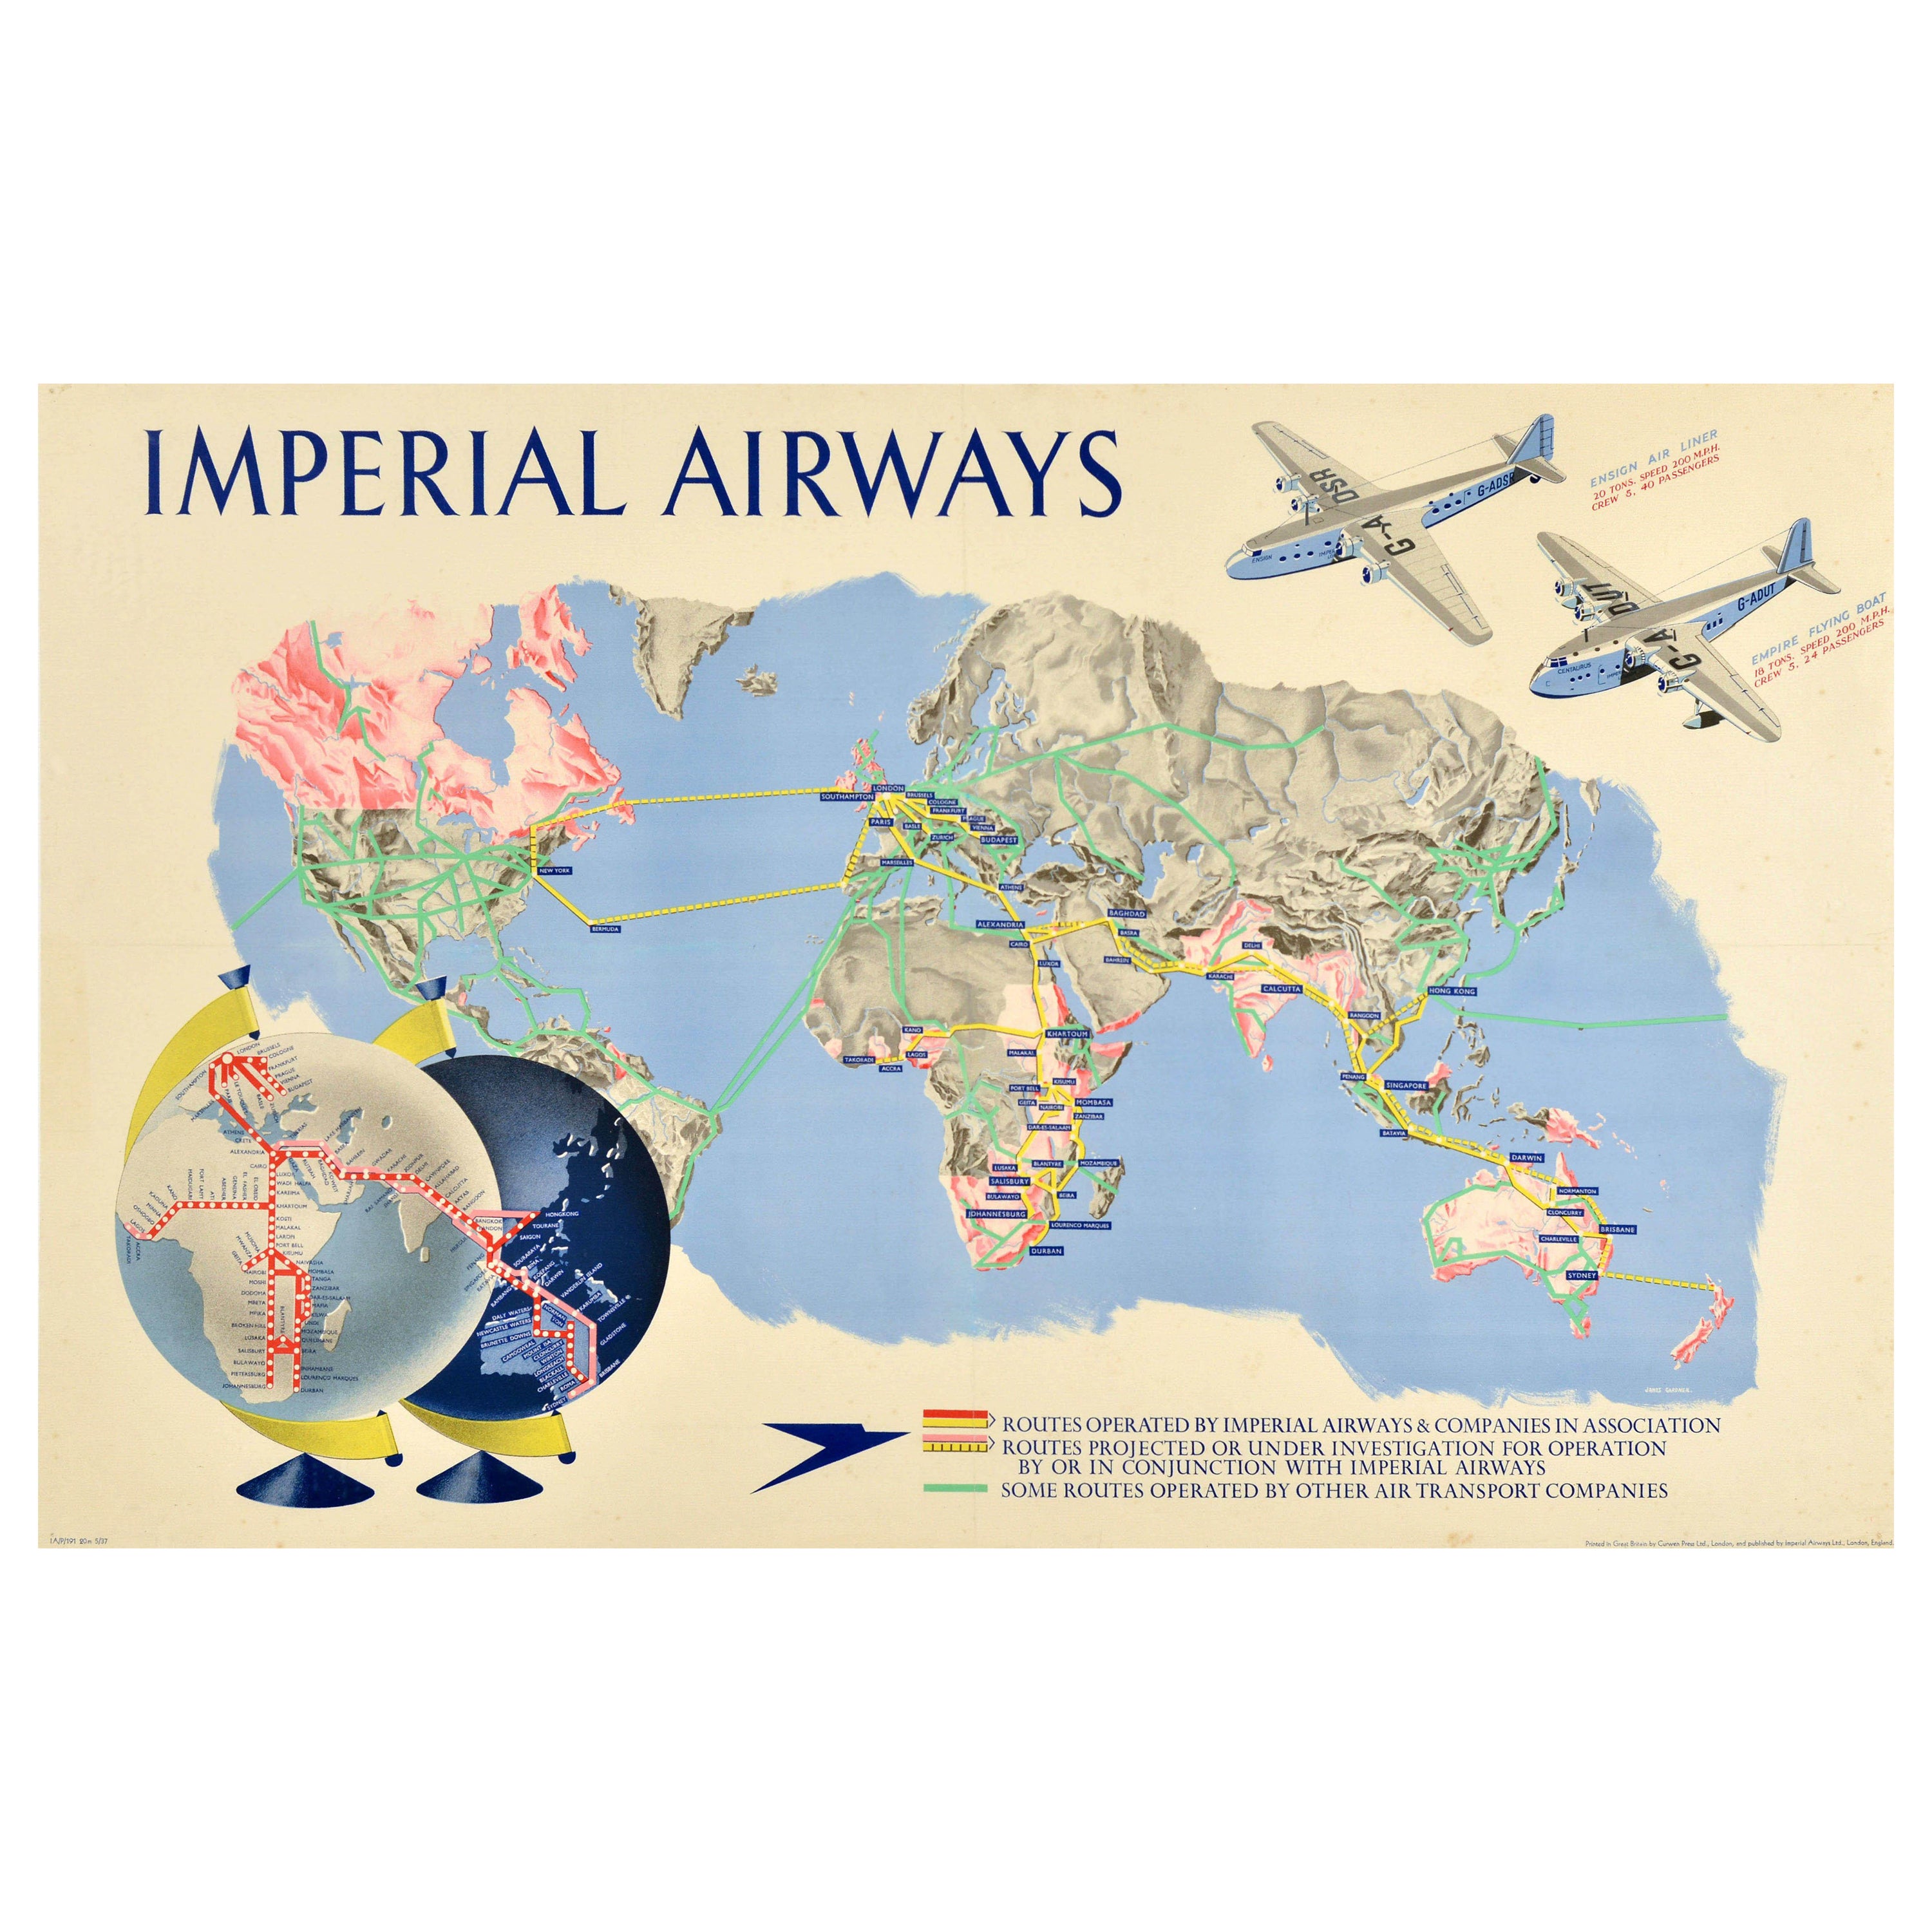 Original Vintage Travel Poster Imperial Airways Routes Ensign Empire Flying Boat For Sale